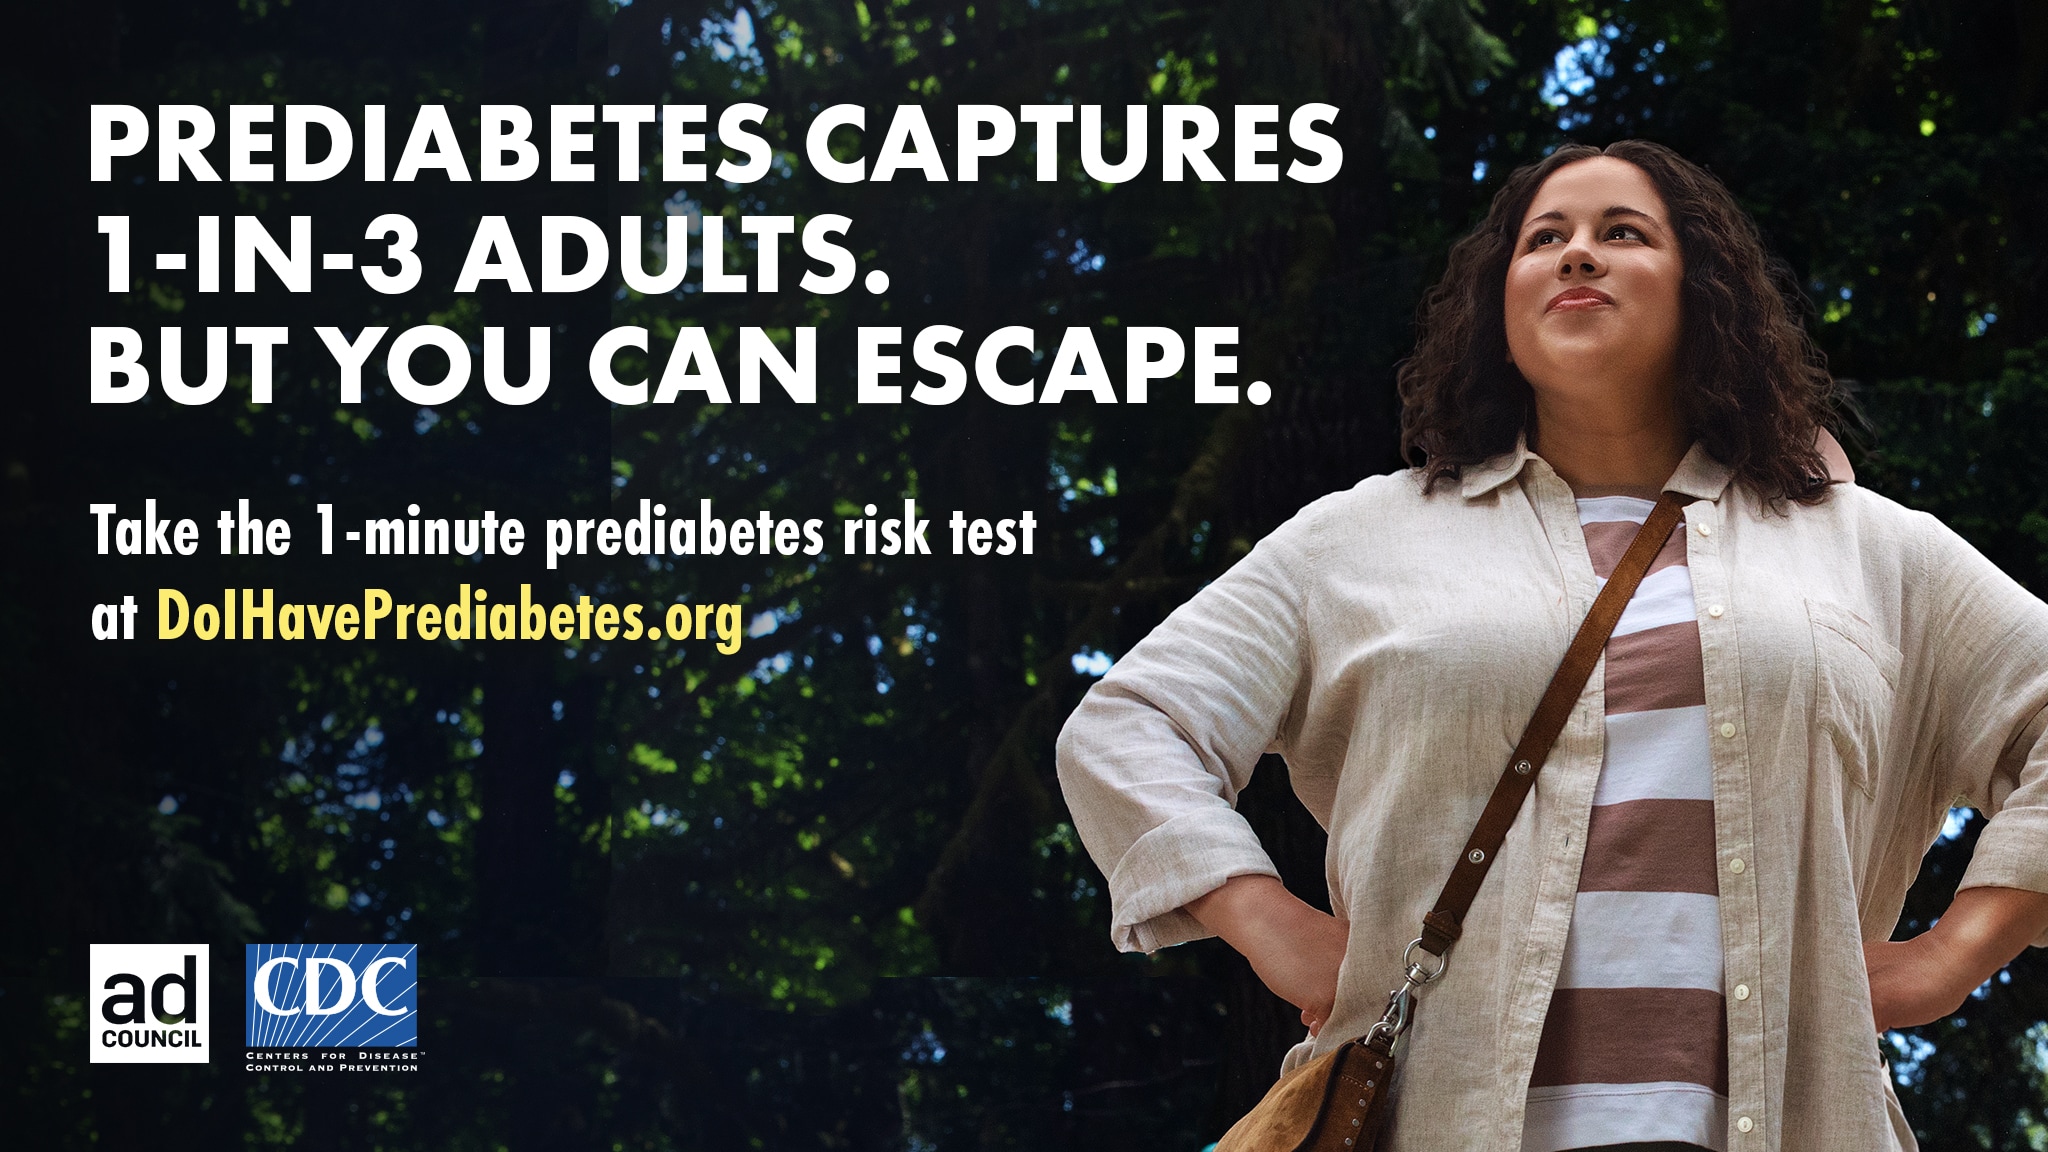 Prediabetes captures 1 in 3 adults. But you can escape.